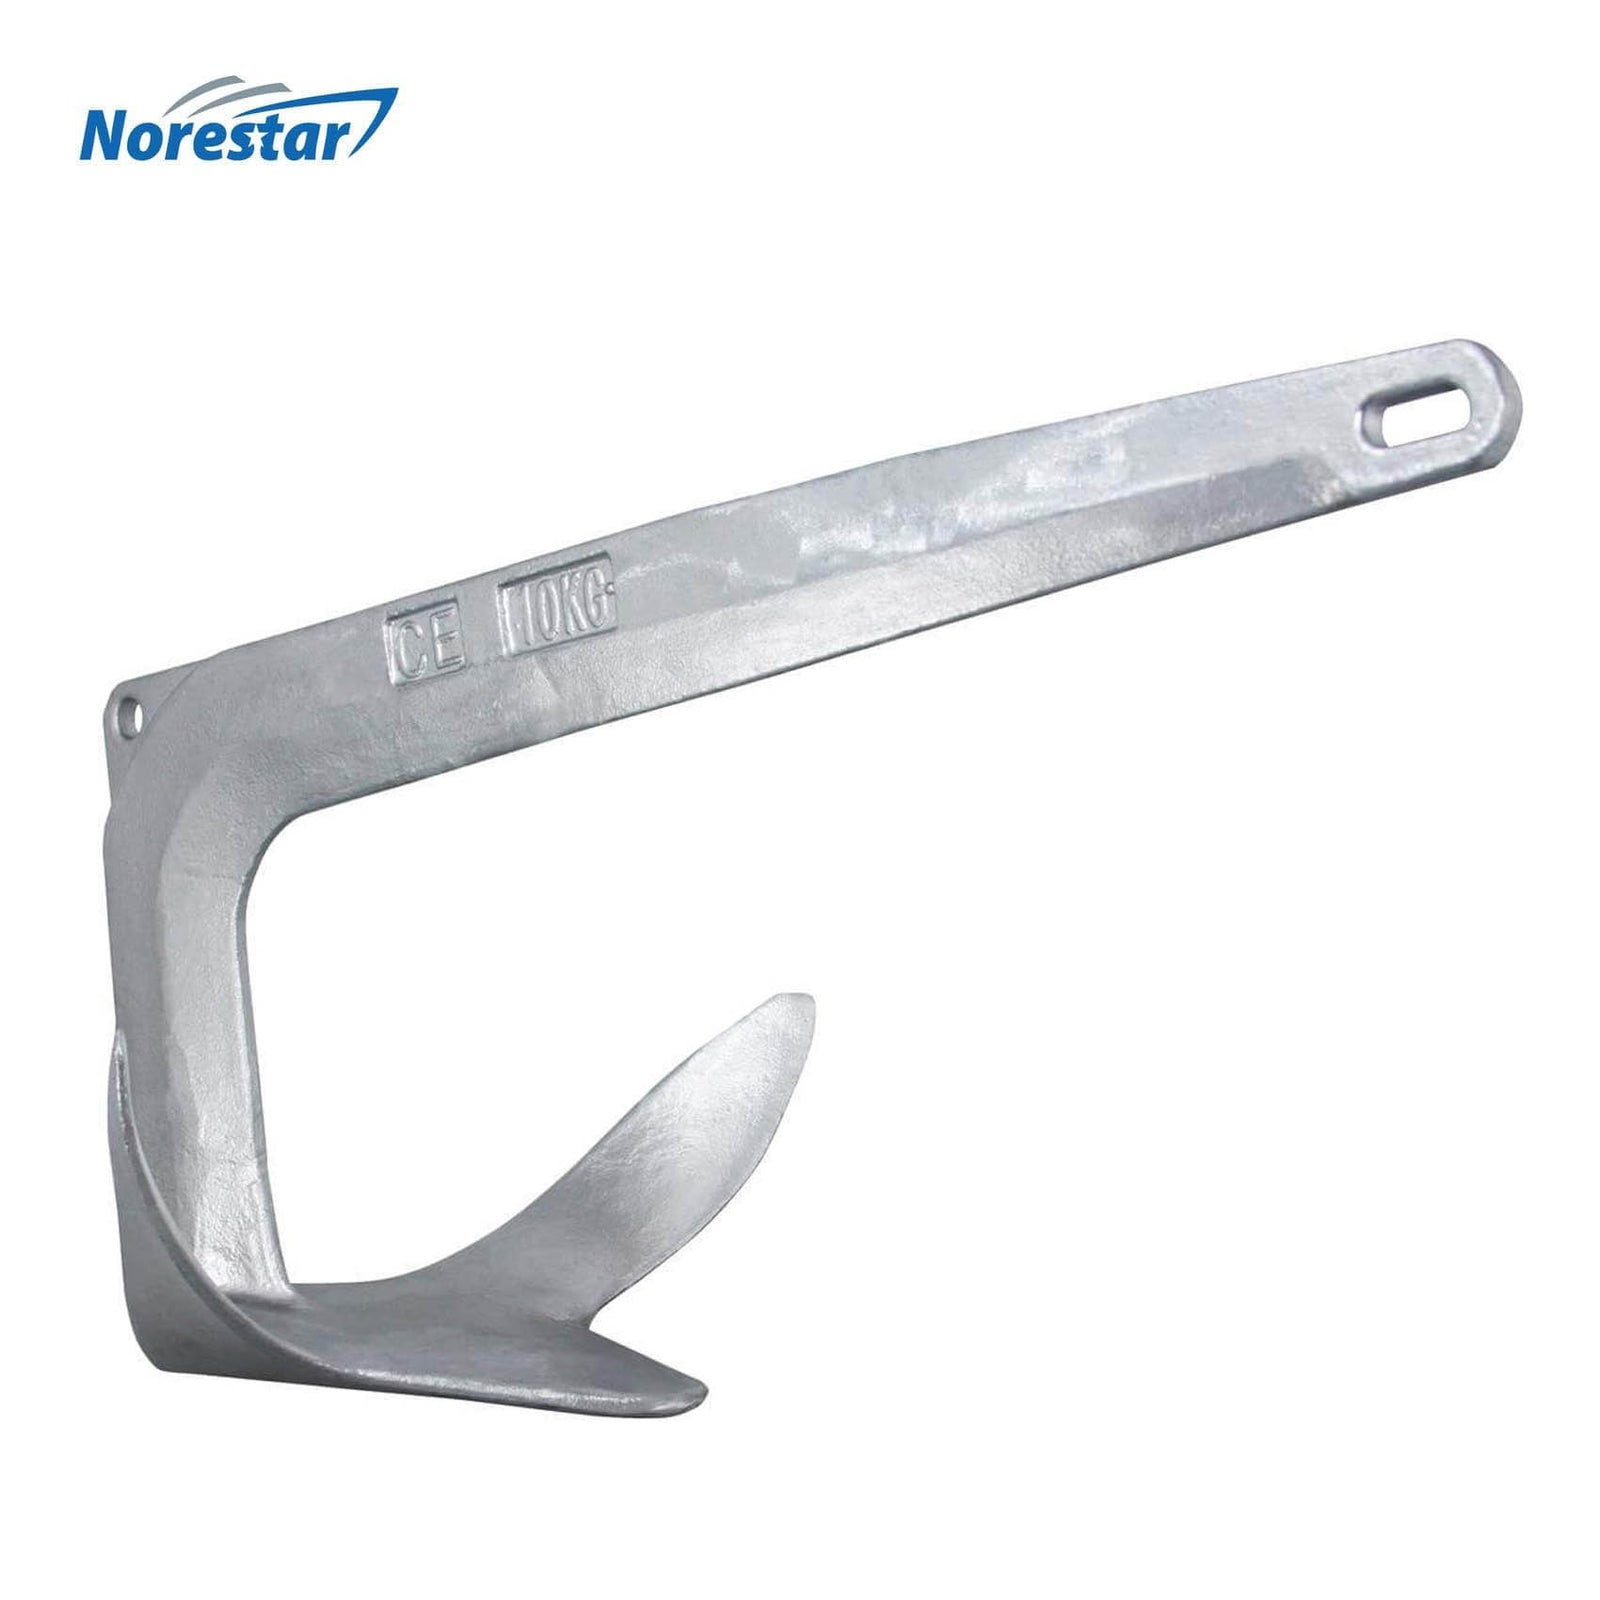 Galvanized Steel Bruce/Claw Boat Anchor by Norestar